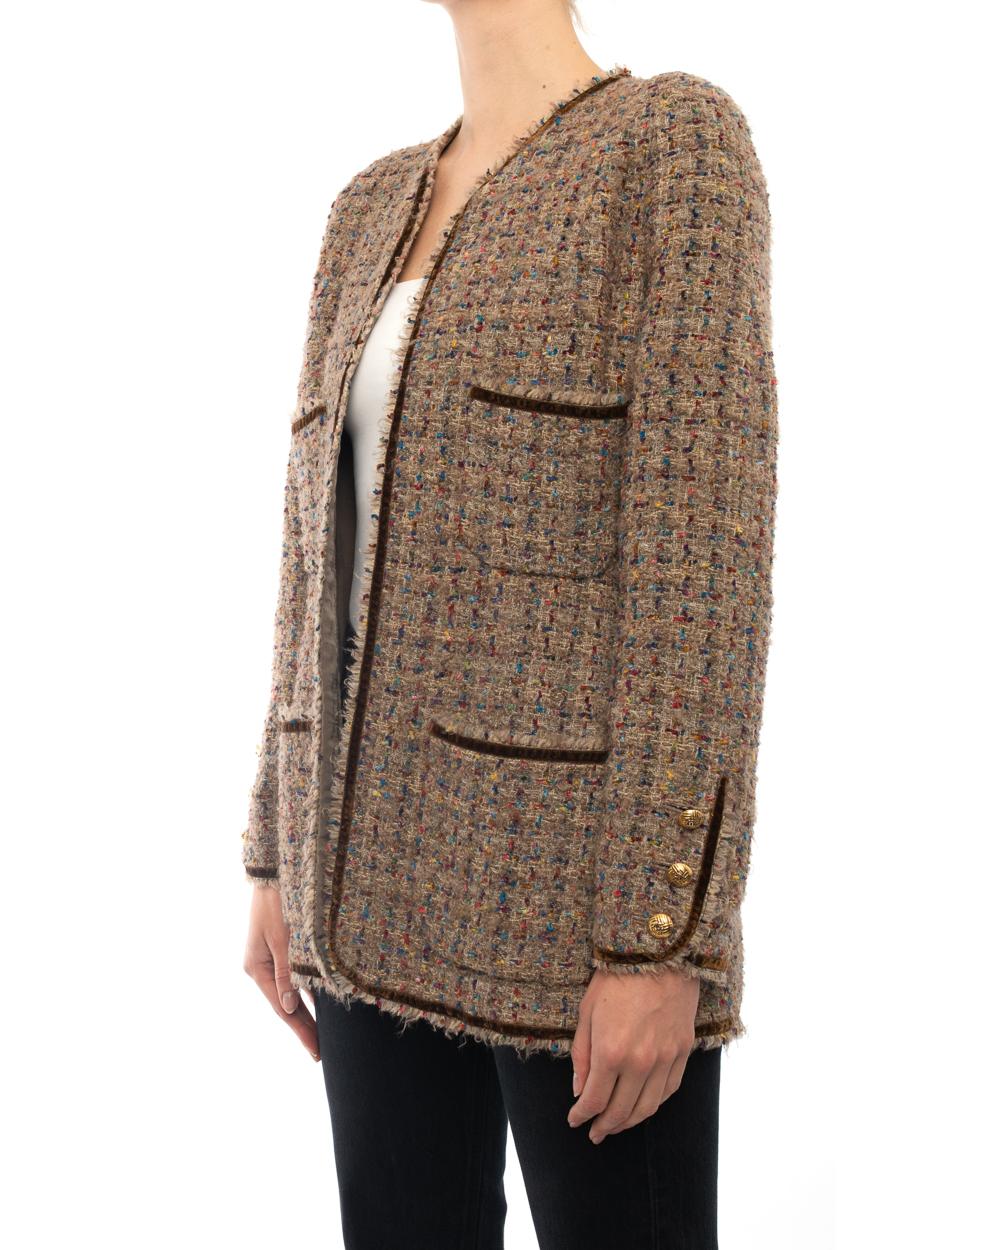 Chanel 1986 Vintage Brown Tweed Jacket with Gold CC Buttons.  From the fall 1986 collection. Brown velvet ribbon trim, front chest and hip pockets, goldtone CC logo buttons, raglan sleeves, worn open with no closures.  Taupe brown tweed with flecks